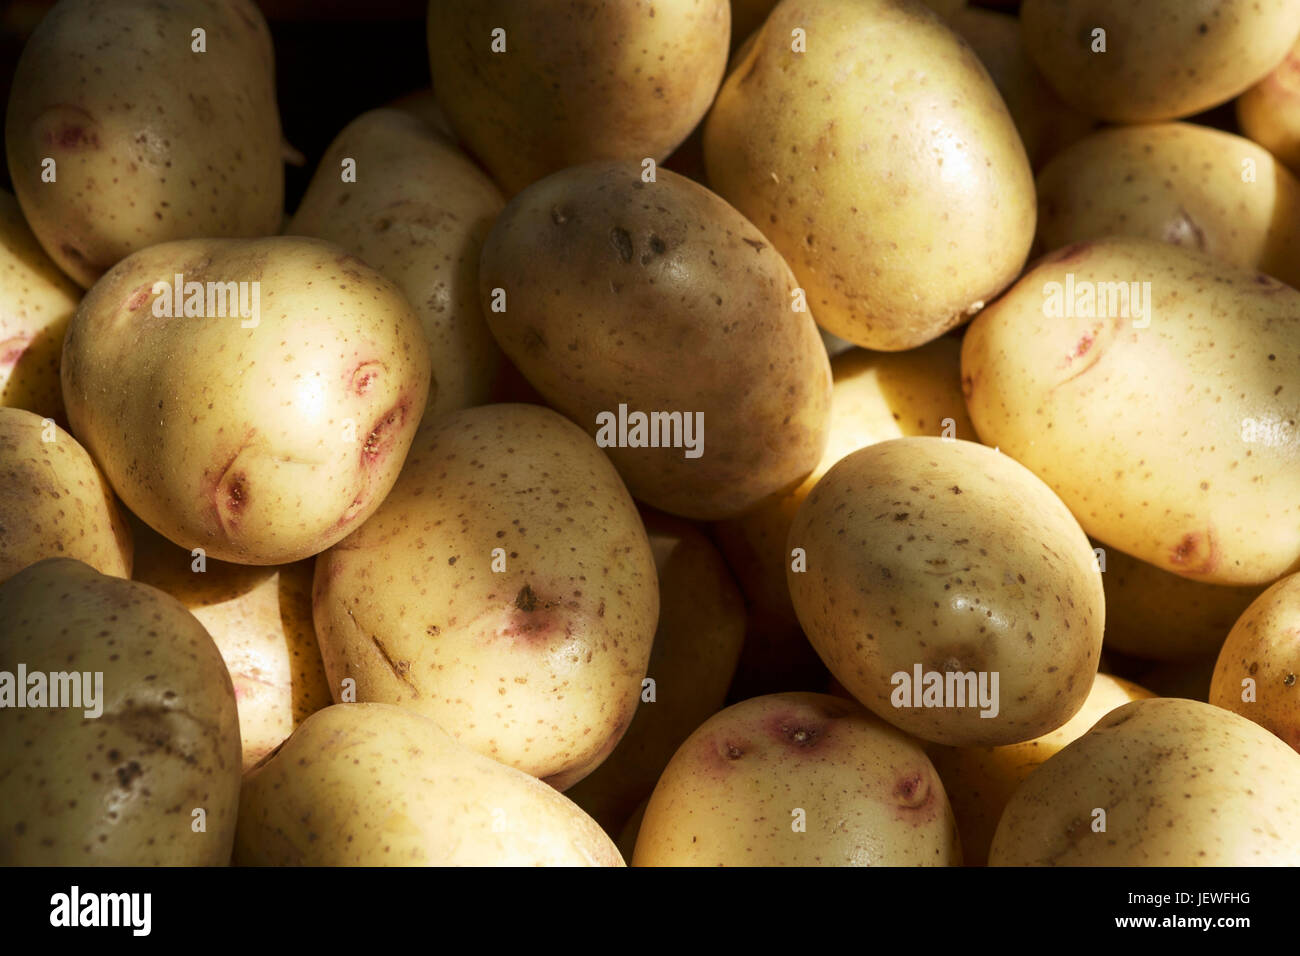 Spuds, jacket potatoes, staple foods, rising food prices. Inflation. UK inflation. Consumer staples Stock Photo